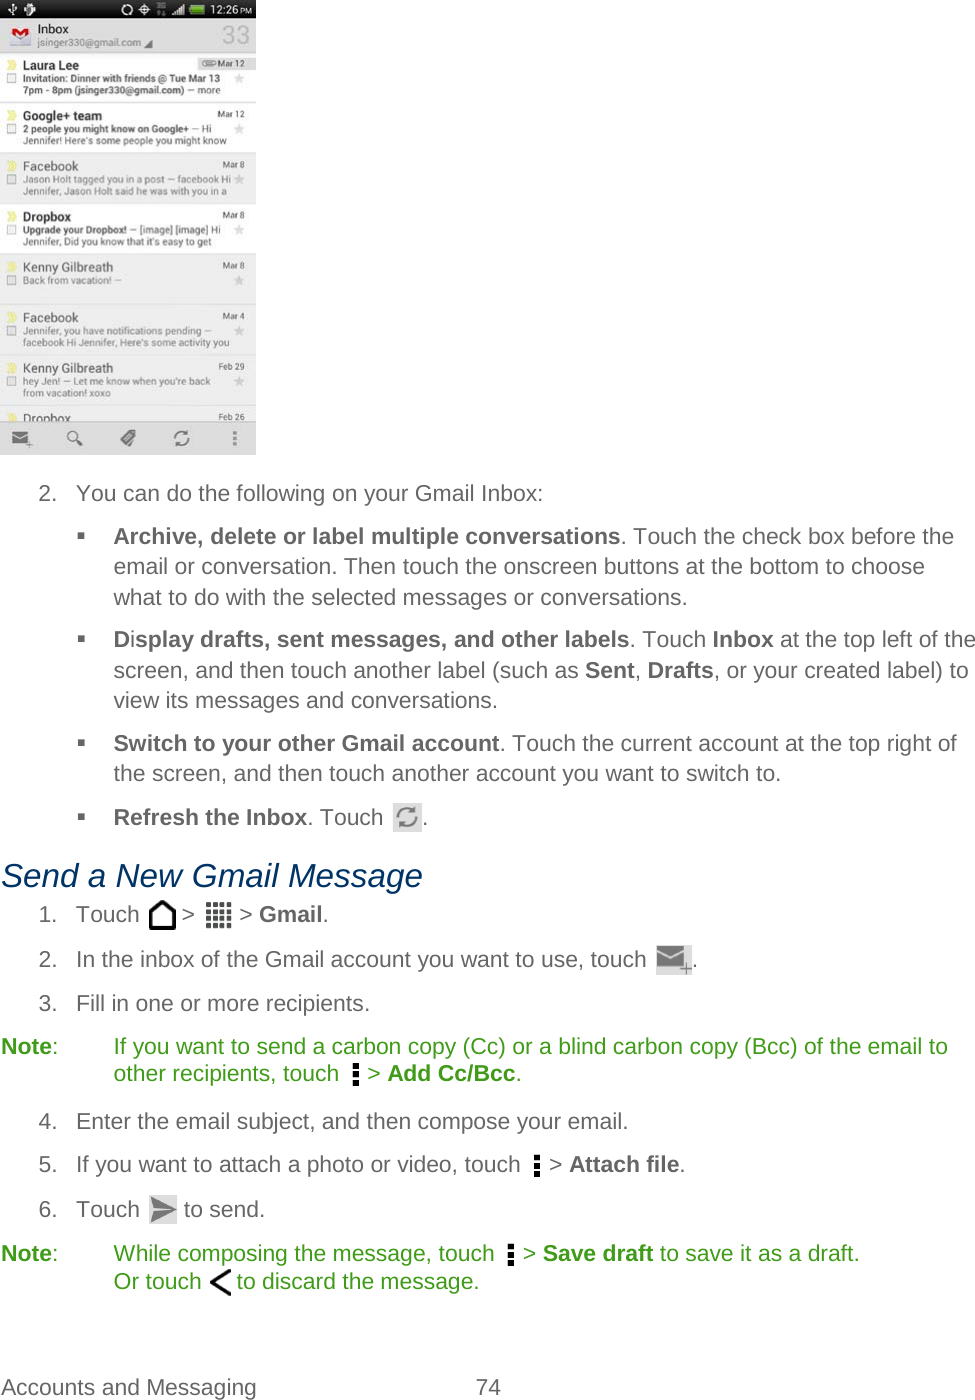  Accounts and Messaging 74    2. You can do the following on your Gmail Inbox:  Archive, delete or label multiple conversations. Touch the check box before the email or conversation. Then touch the onscreen buttons at the bottom to choose what to do with the selected messages or conversations.  Display drafts, sent messages, and other labels. Touch Inbox at the top left of the screen, and then touch another label (such as Sent, Drafts, or your created label) to view its messages and conversations.  Switch to your other Gmail account. Touch the current account at the top right of the screen, and then touch another account you want to switch to.  Refresh the Inbox. Touch  . Send a New Gmail Message 1. Touch   &gt;   &gt; Gmail. 2. In the inbox of the Gmail account you want to use, touch  . 3. Fill in one or more recipients. Note:  If you want to send a carbon copy (Cc) or a blind carbon copy (Bcc) of the email to other recipients, touch   &gt; Add Cc/Bcc. 4. Enter the email subject, and then compose your email. 5. If you want to attach a photo or video, touch   &gt; Attach file. 6.  Touch   to send. Note:  While composing the message, touch   &gt; Save draft to save it as a draft. Or touch   to discard the message. 